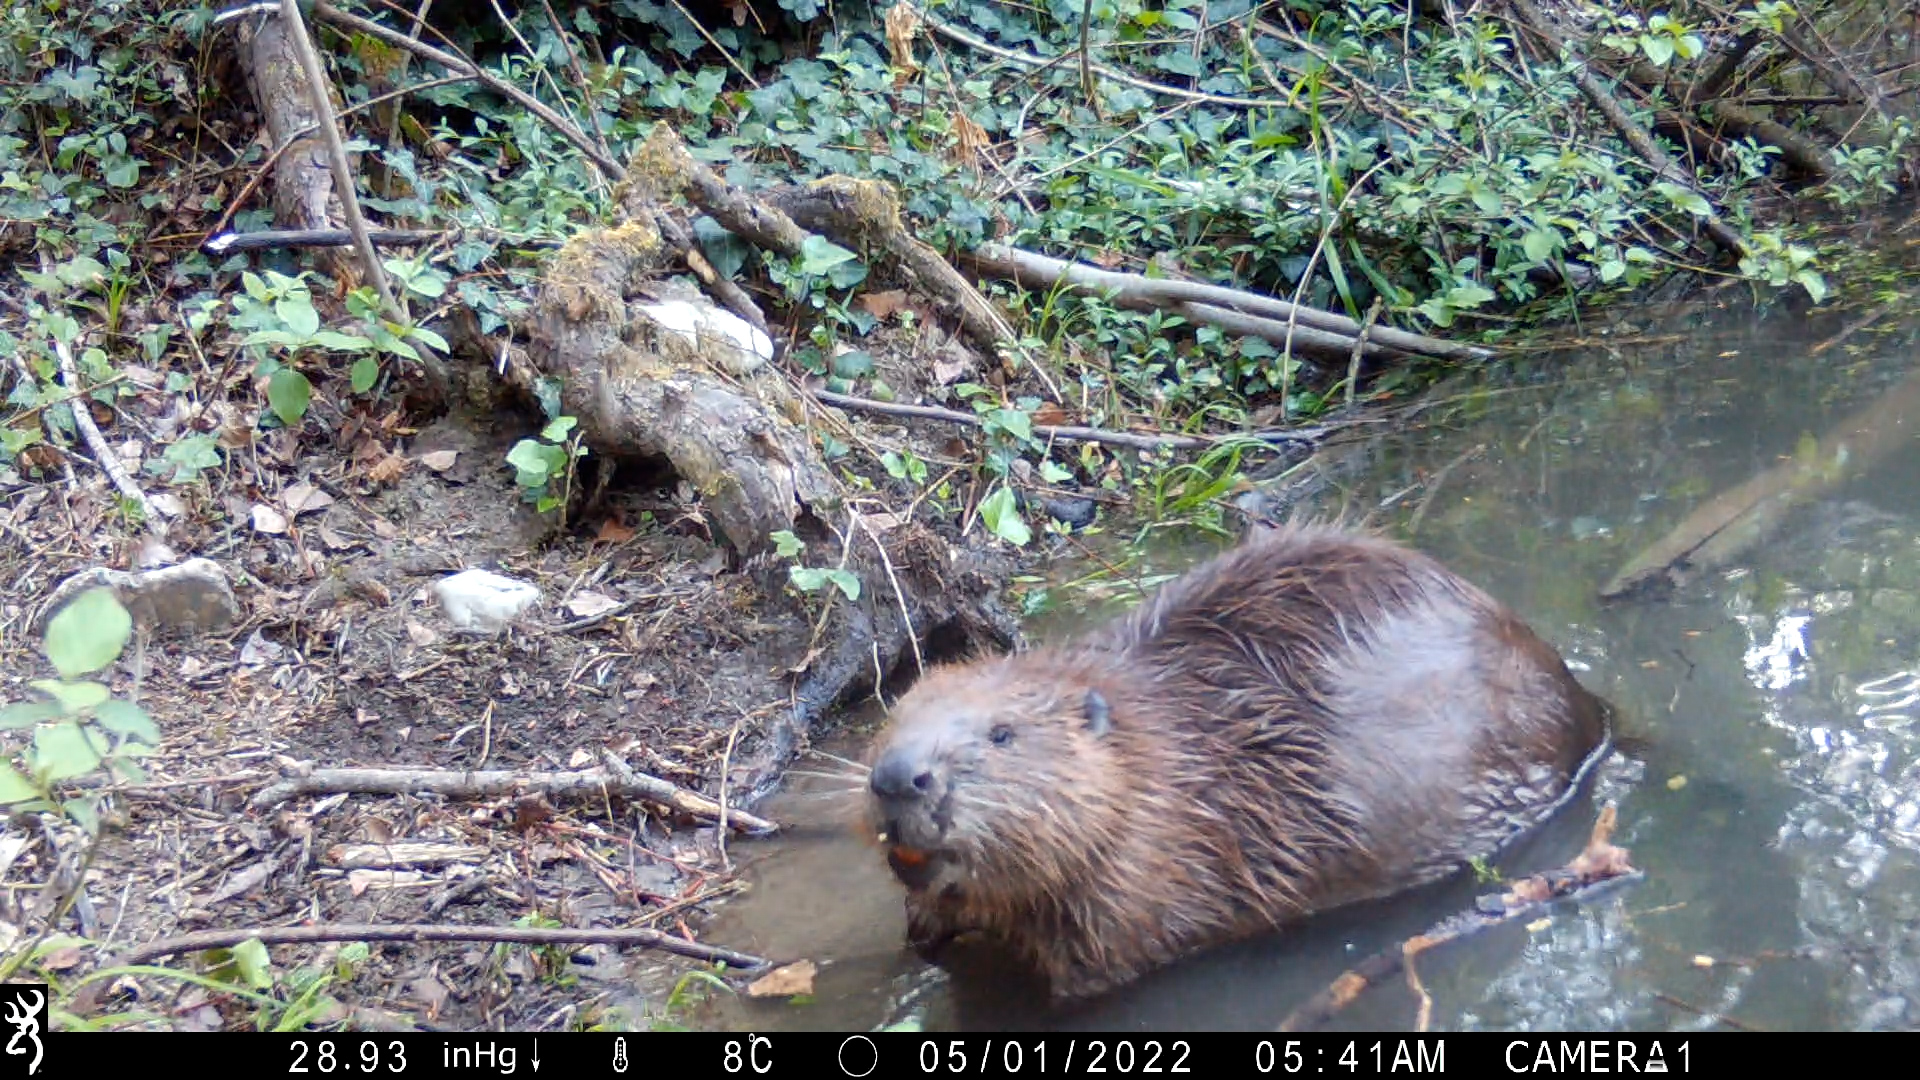 Farmers and fishermen are often concerned that beavers will impact fish populations or damage crops. /Institute of Research on Terrestrial Ecosystems